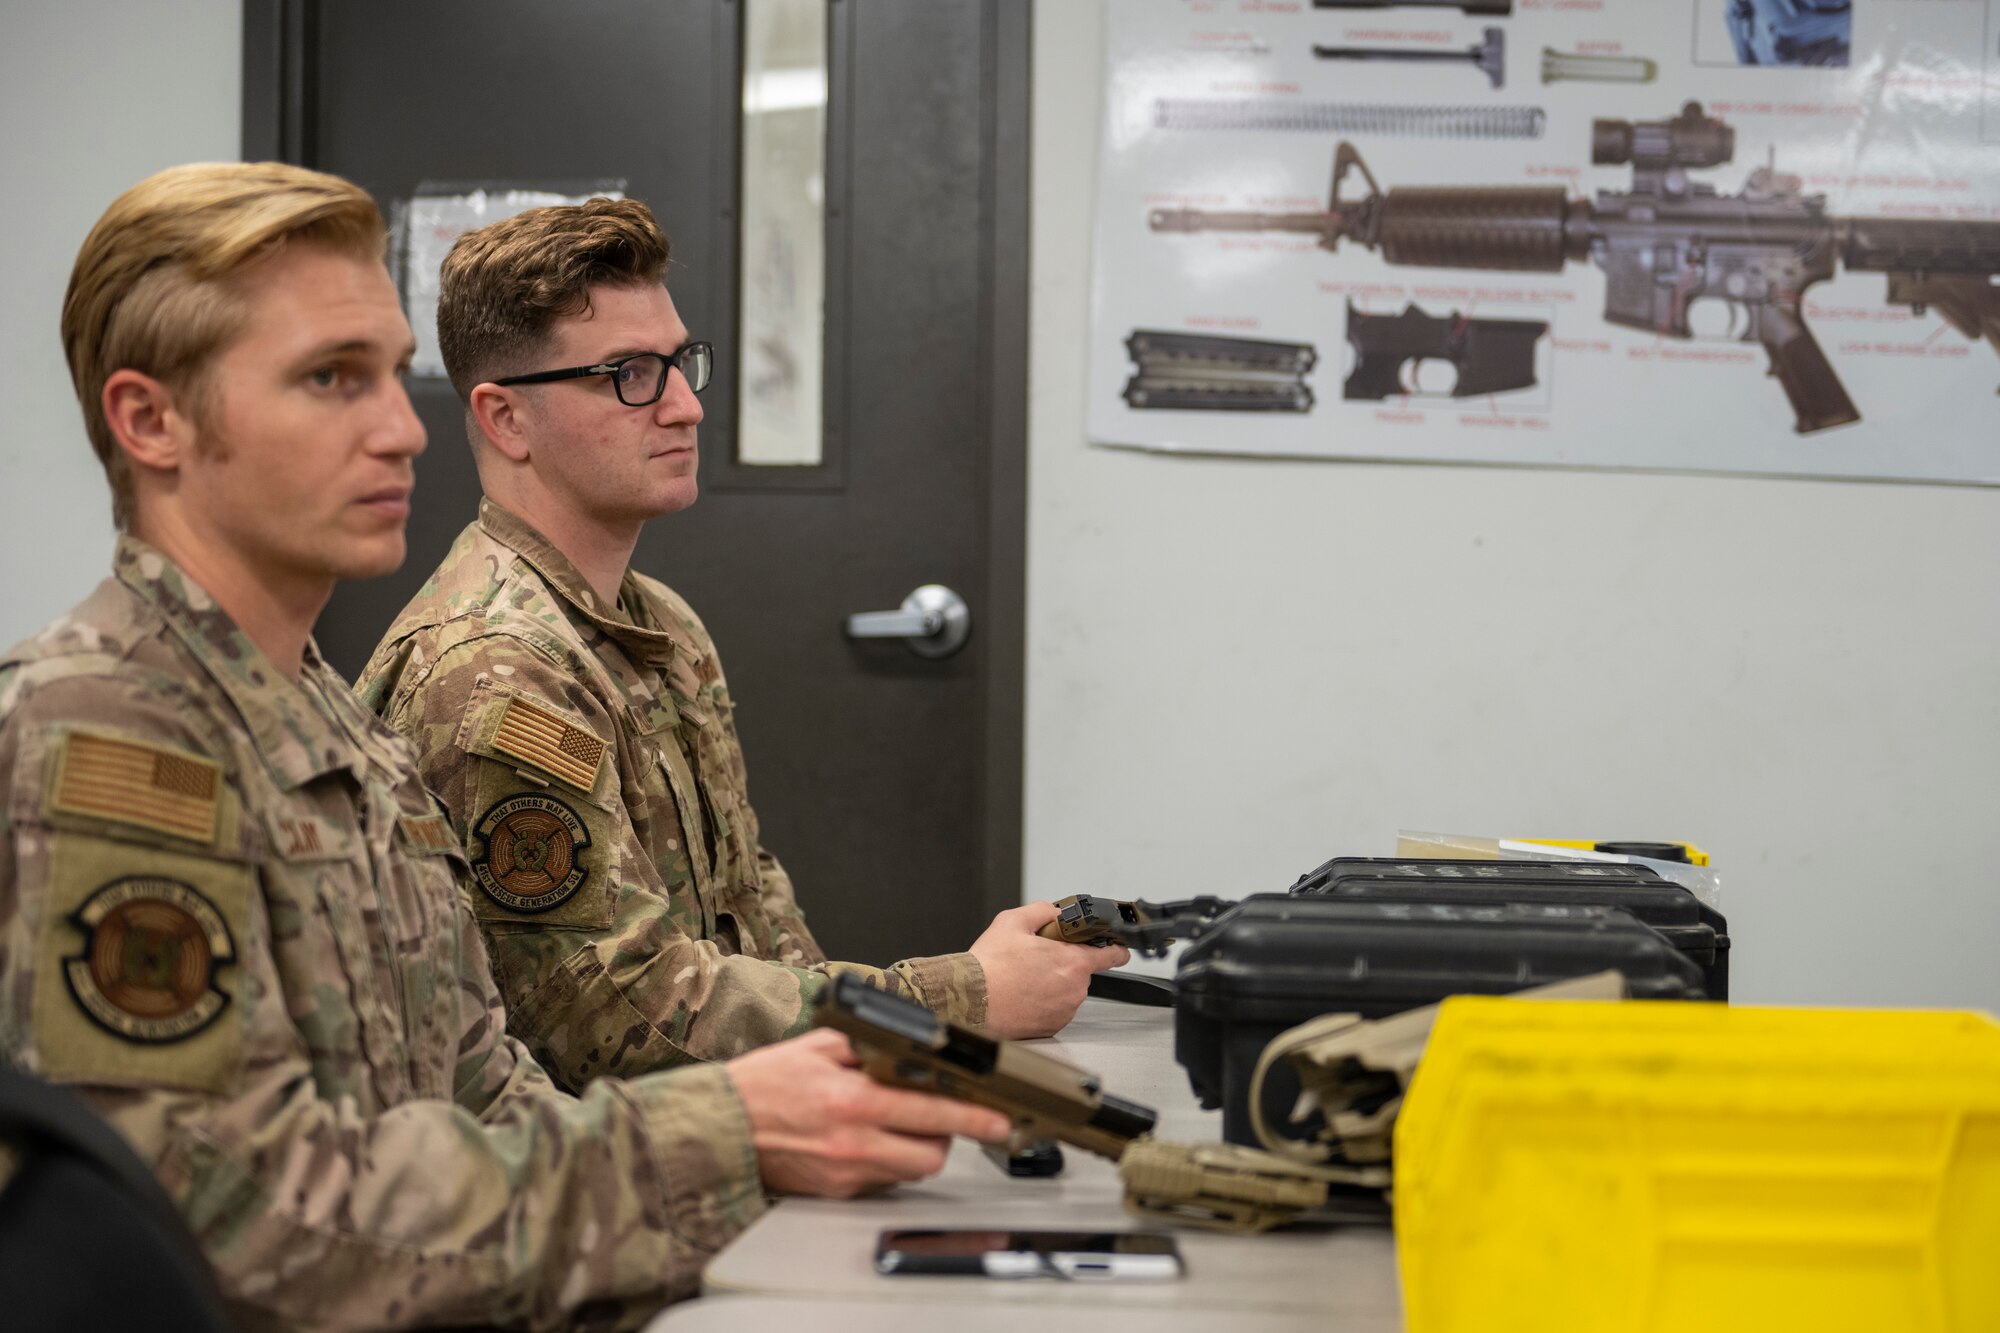 Airmen participate in an orientation and mechanical training.